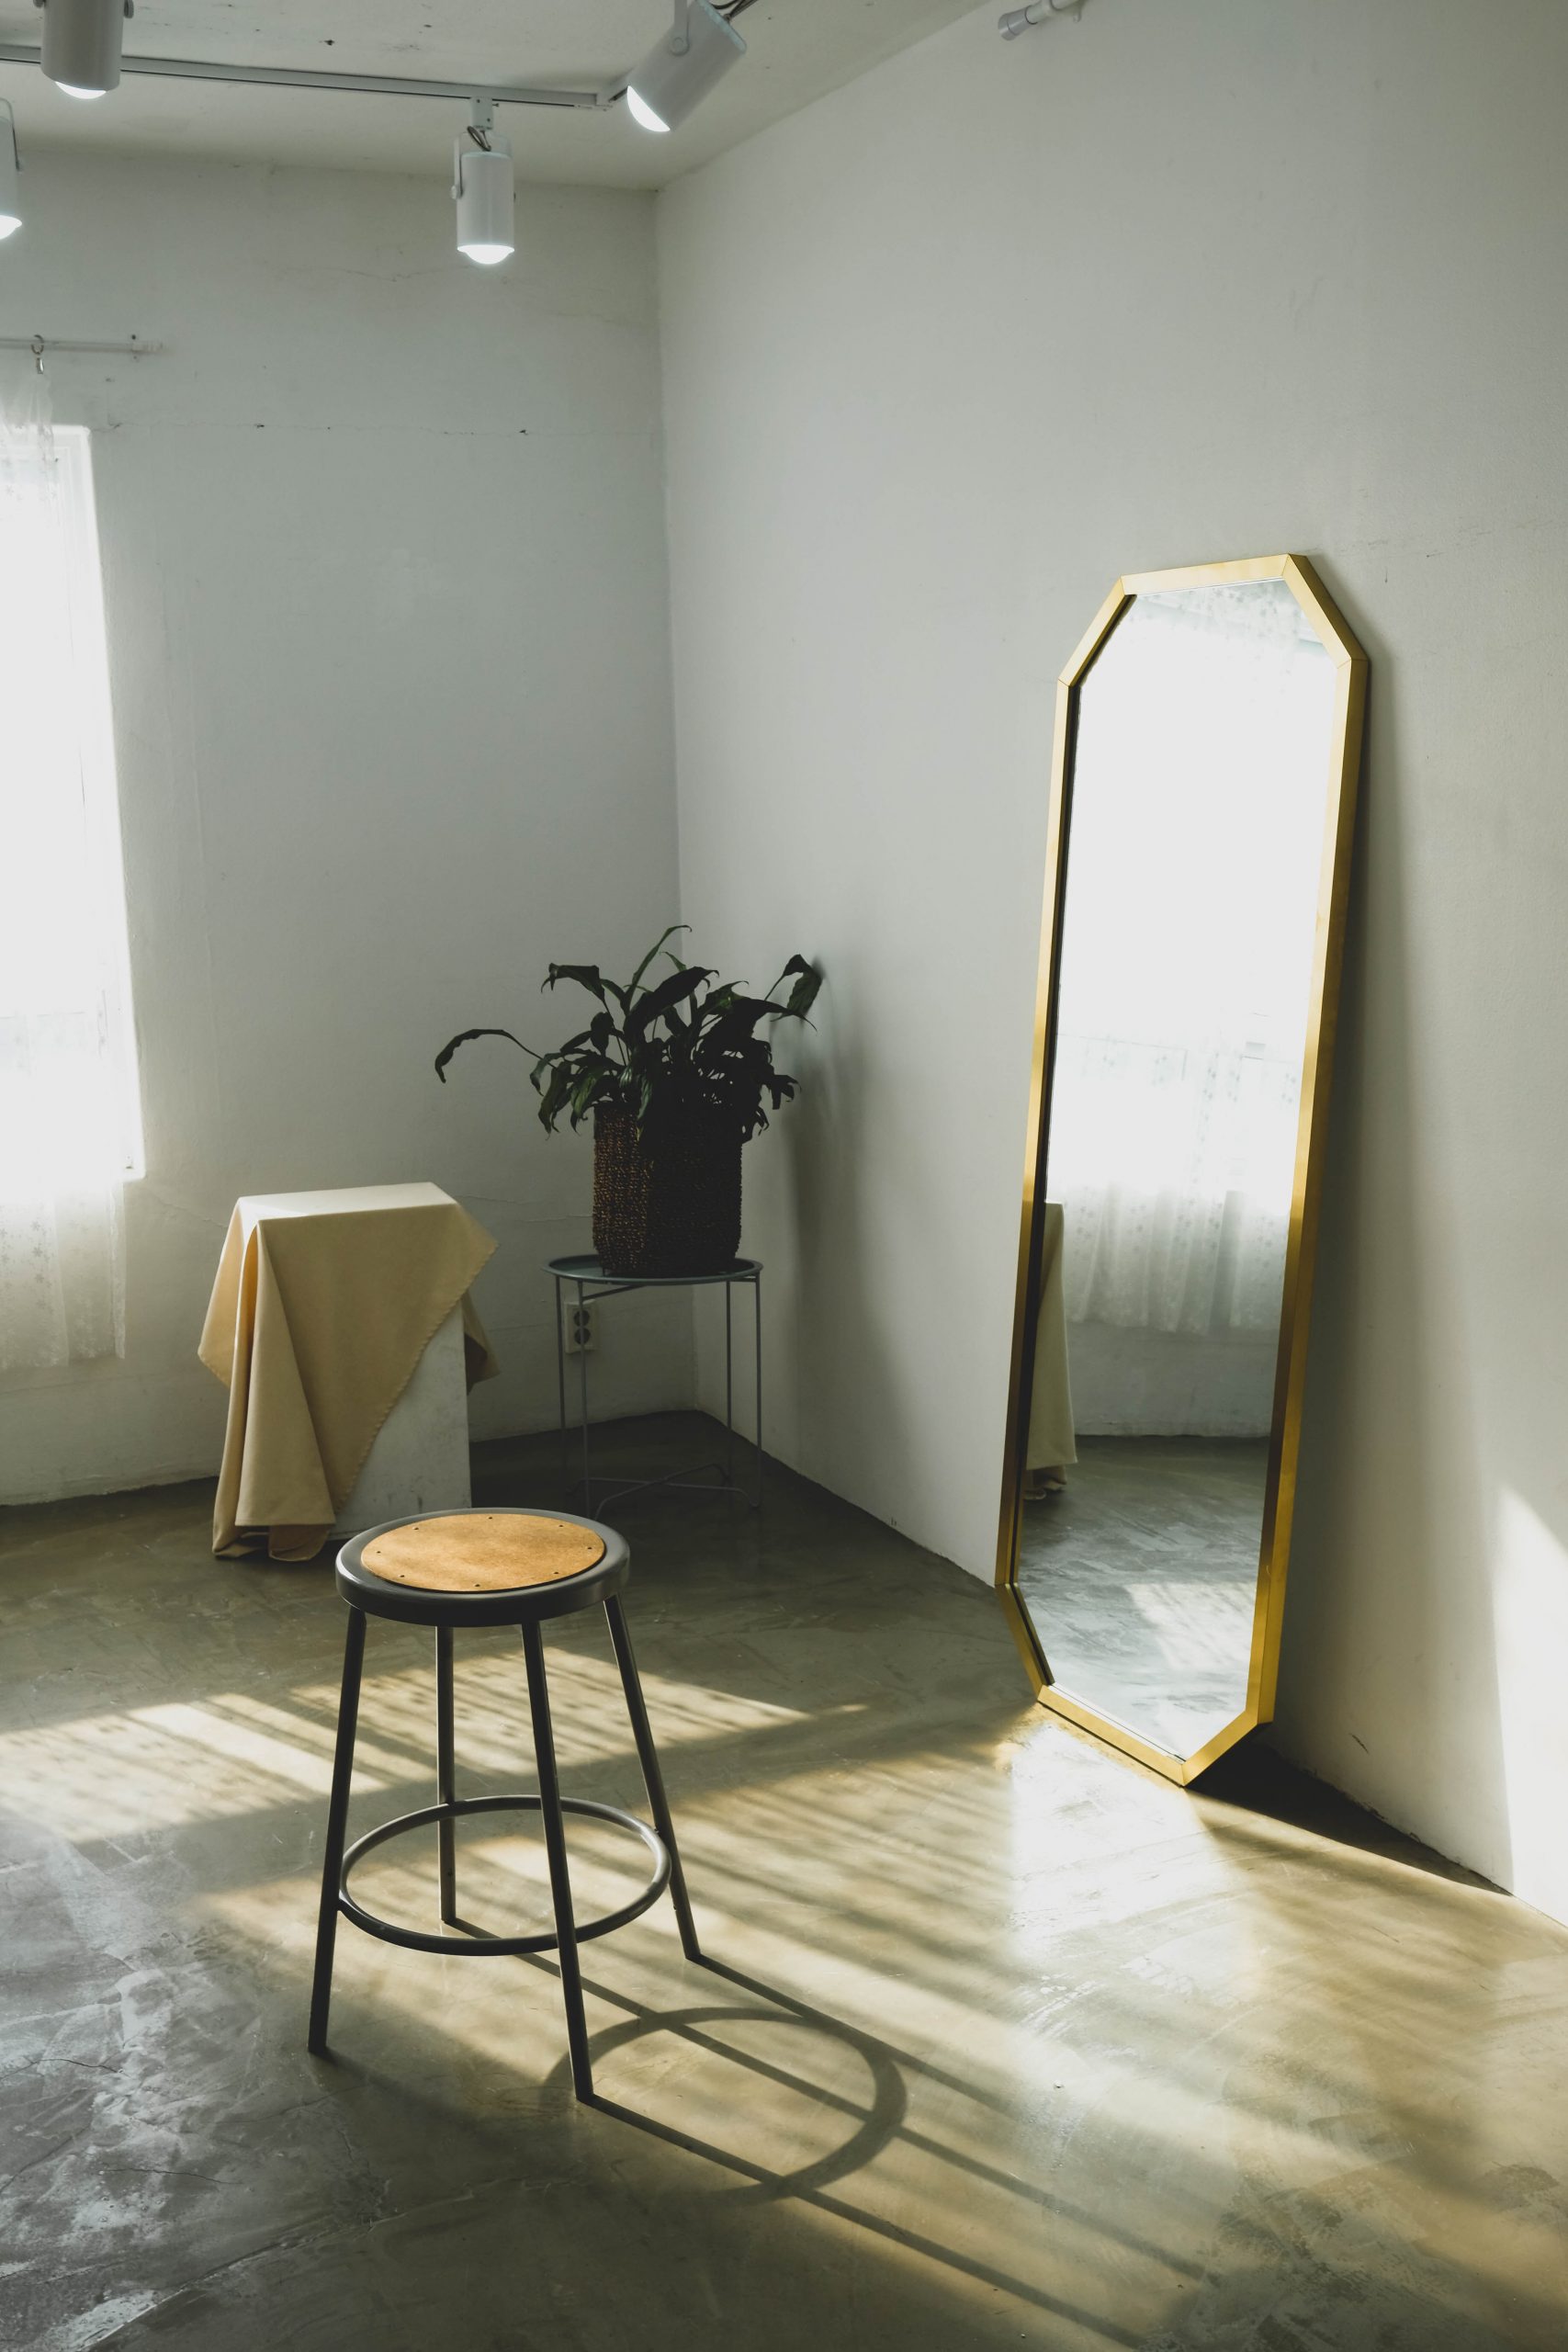 How Mirrors Can Be Used to Transform Your Home